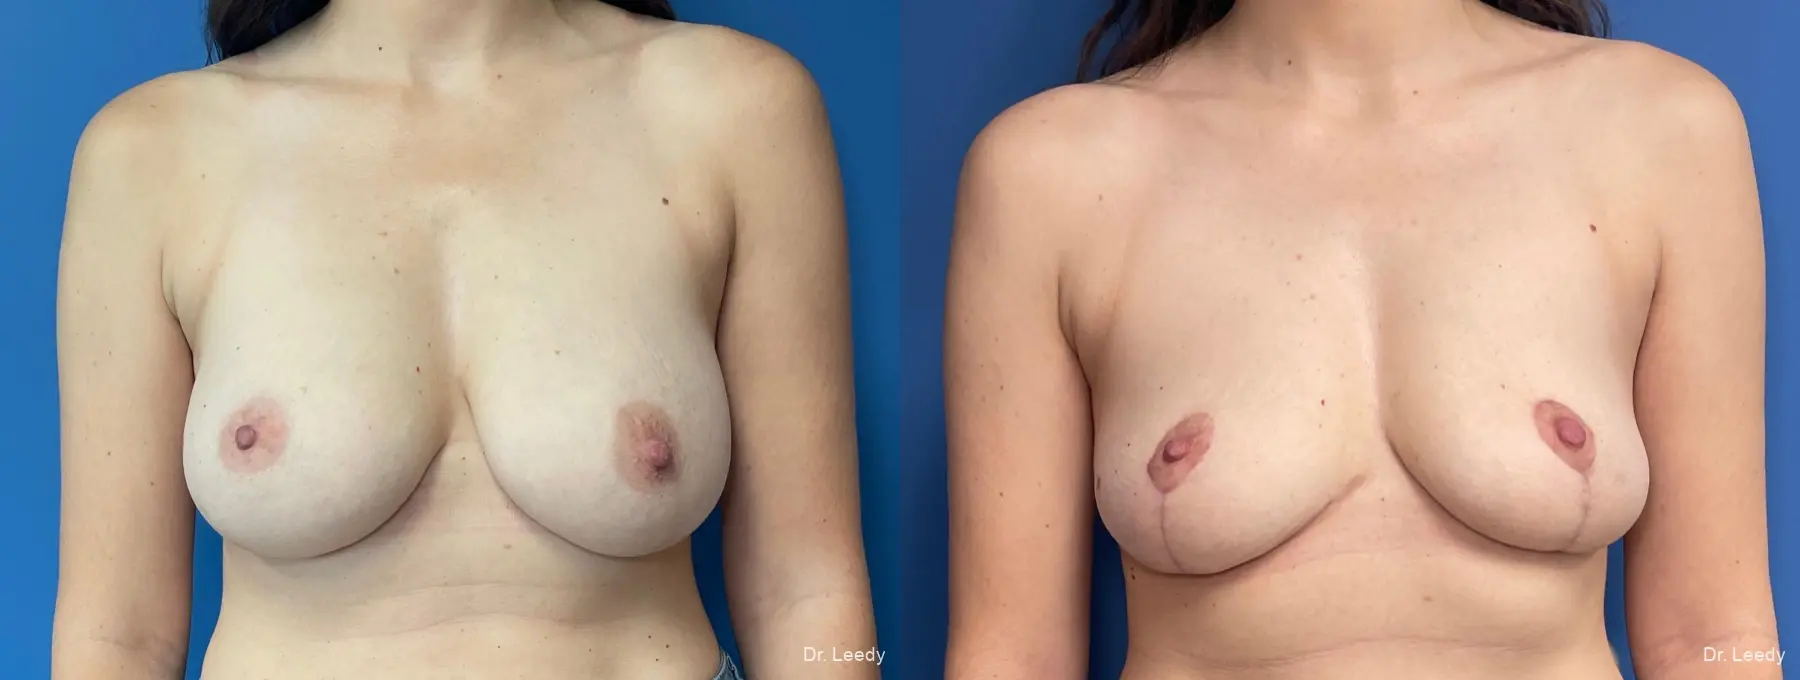 Mastopexy: Patient 3 - Before and After  